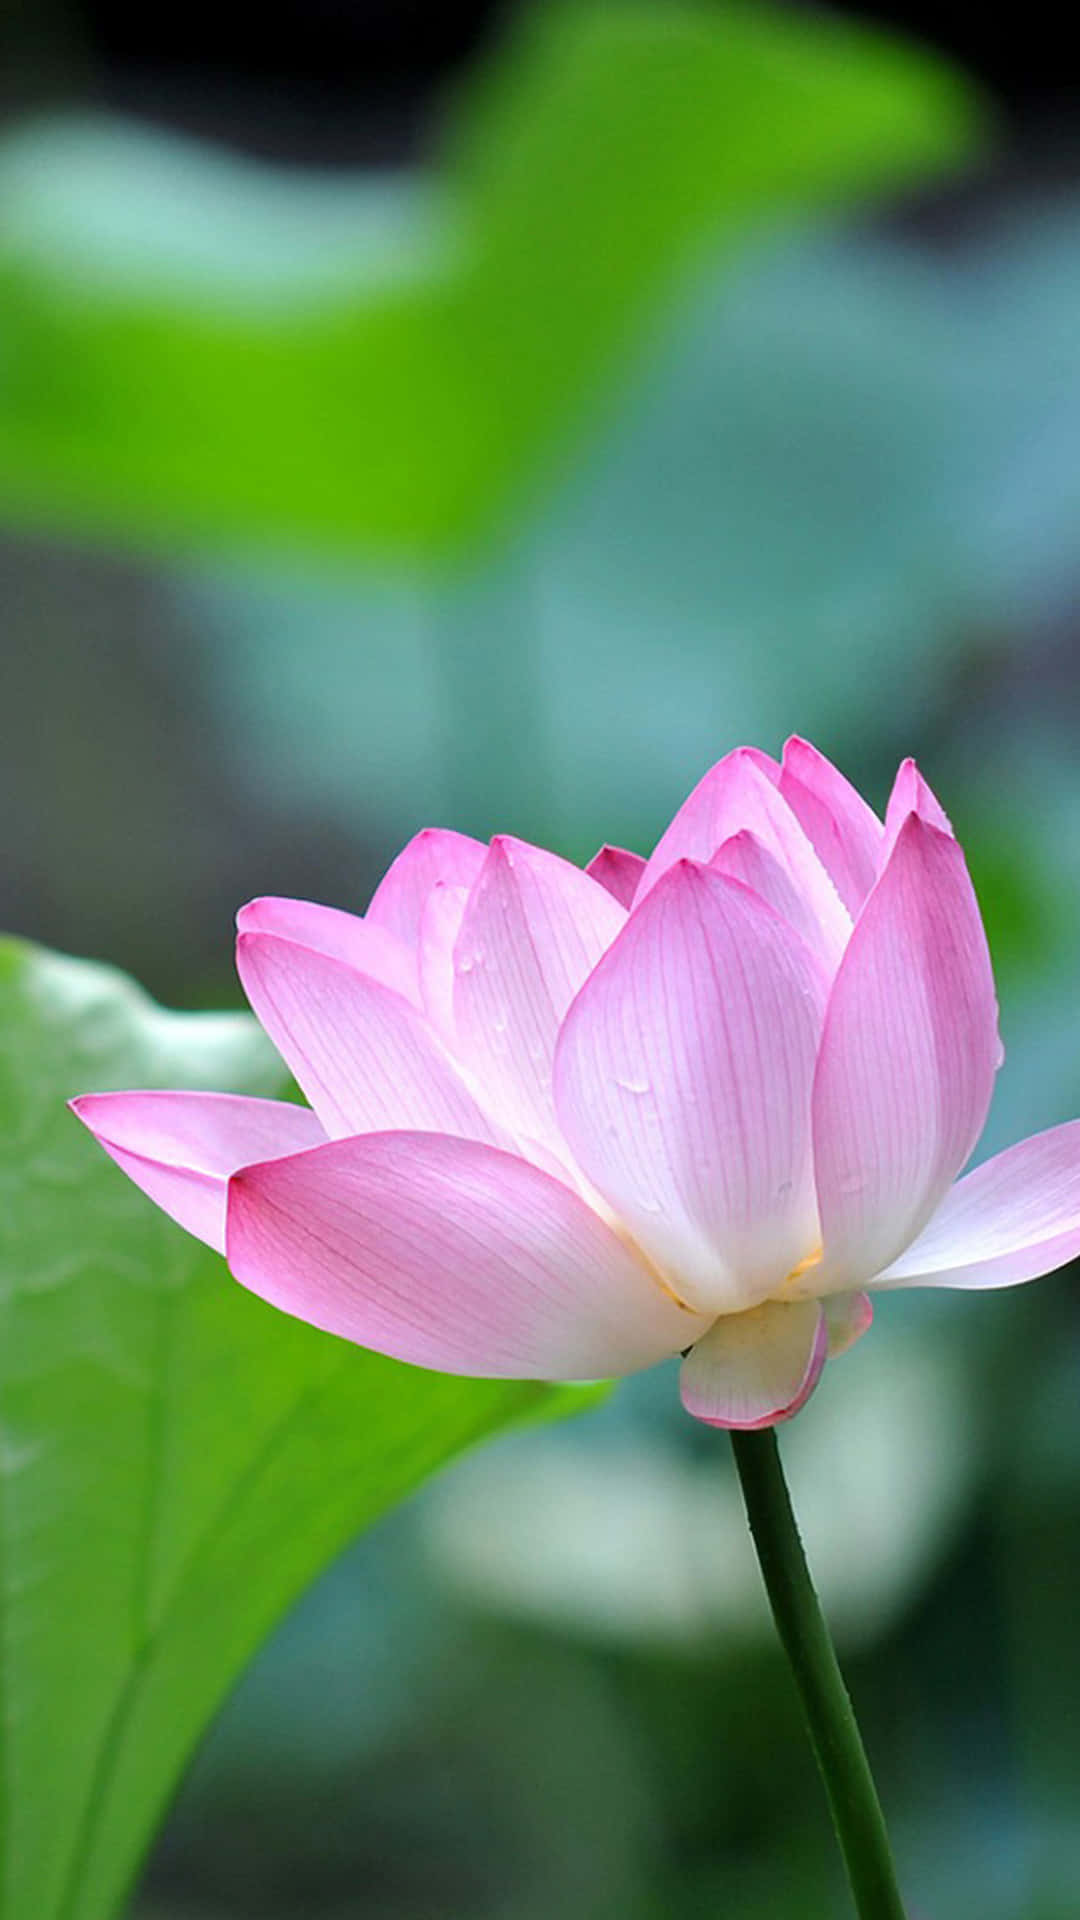 Free download Pictures lotus flower iphone wallpaper ipod touch wallpapers  iphone4 480x800 for your Desktop Mobile  Tablet  Explore 49 Lotus  Flower iPhone Wallpaper  Lotus Flower Wallpaper Lotus Wallpaper Lotus  Flower Wallpapers